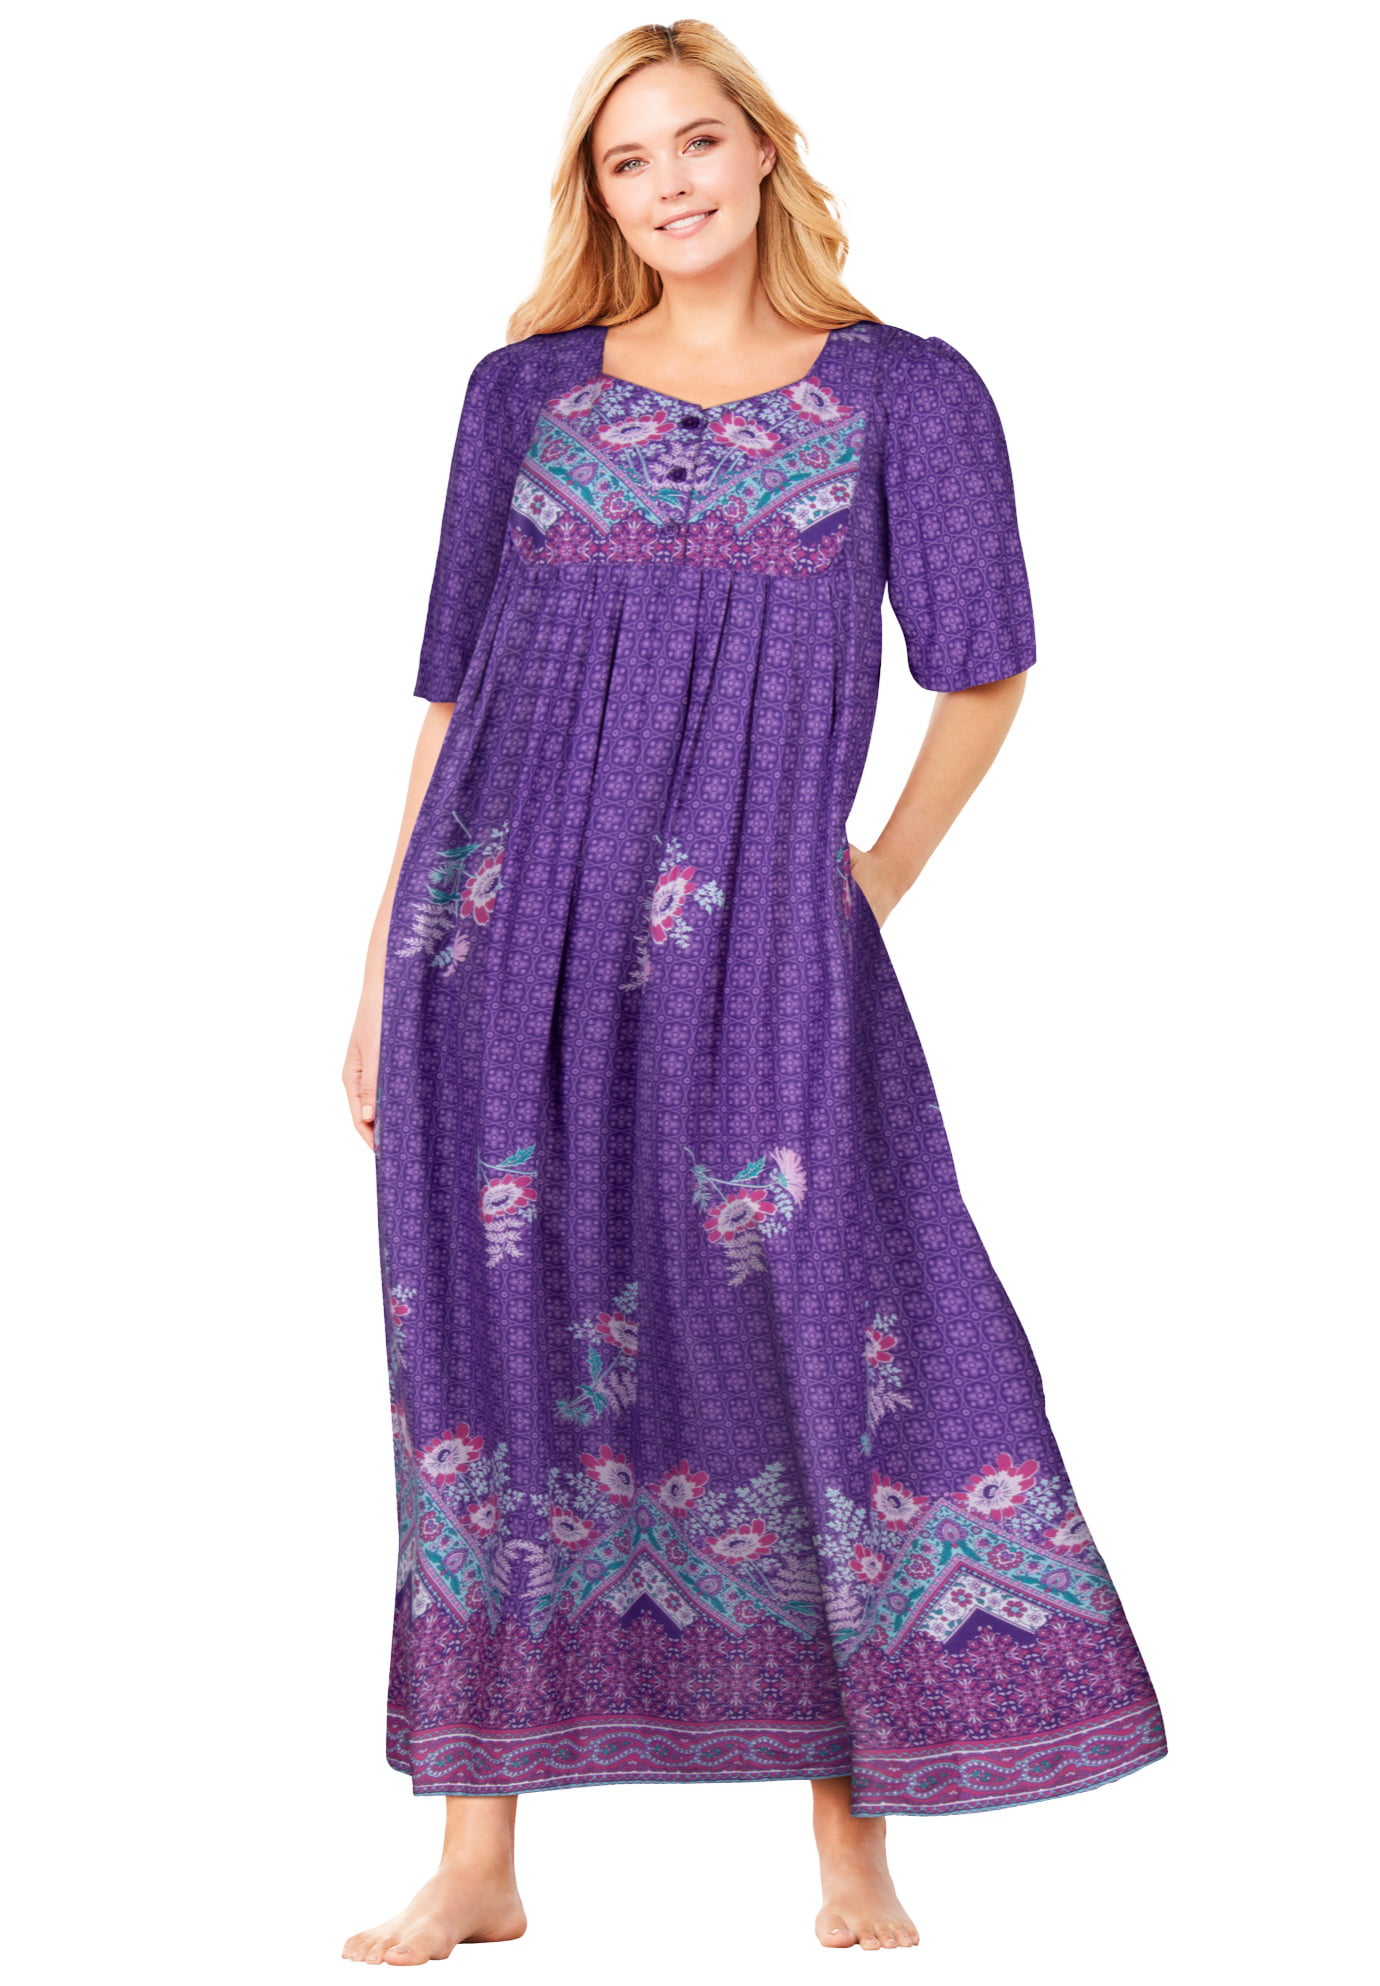 Only Necessities Women's Plus Size Petite Mixed Print Long Dress or ...